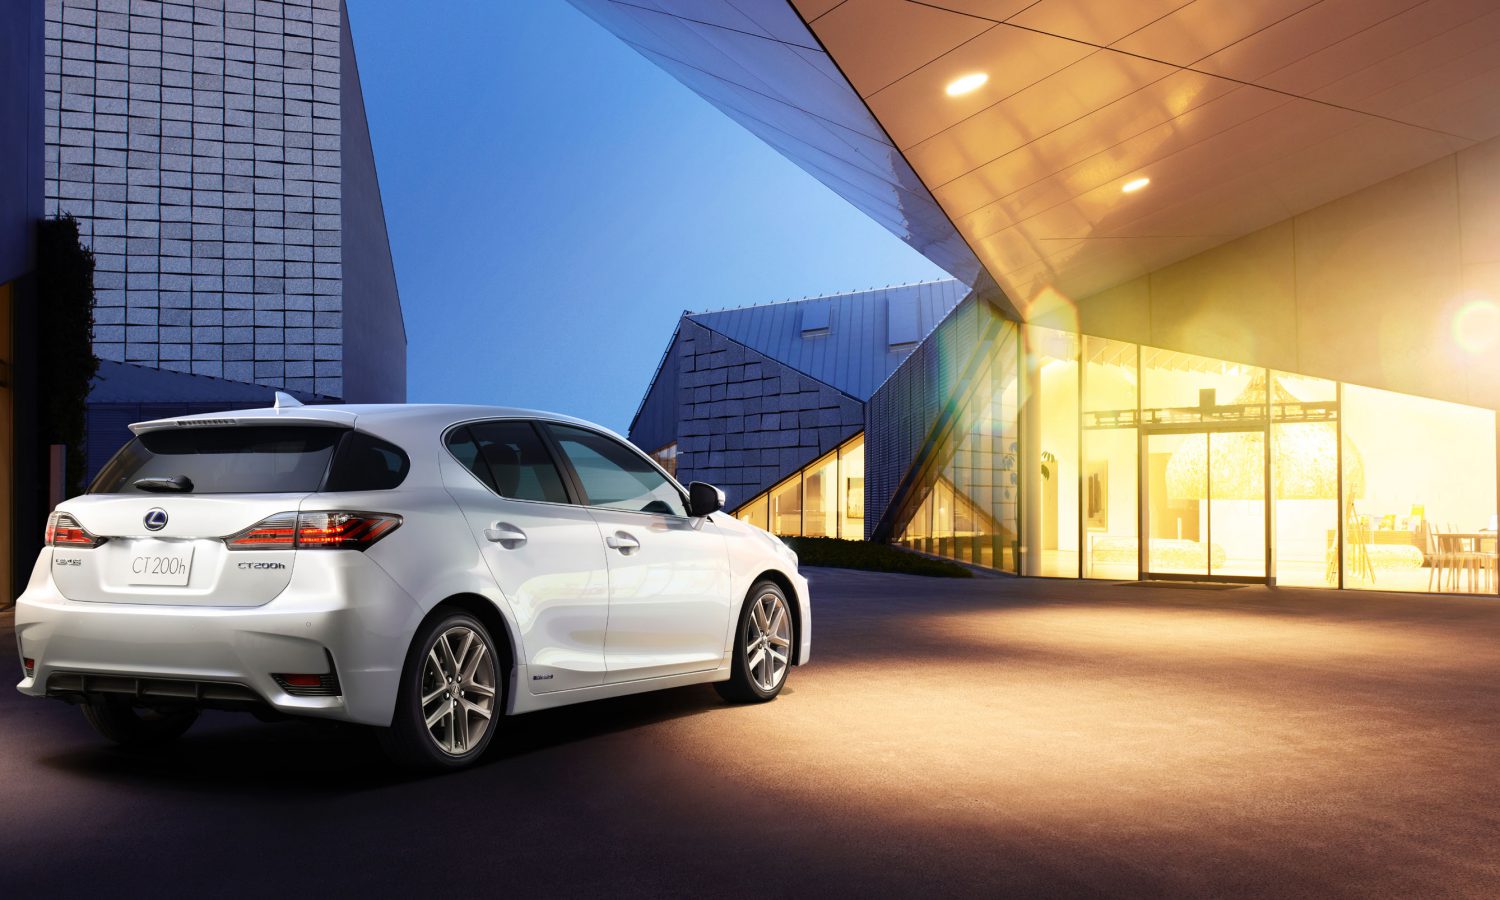 CT 200h Enters 2014 with Fresh Styling and Same MSRP as Previous Year -  Lexus USA Newsroom